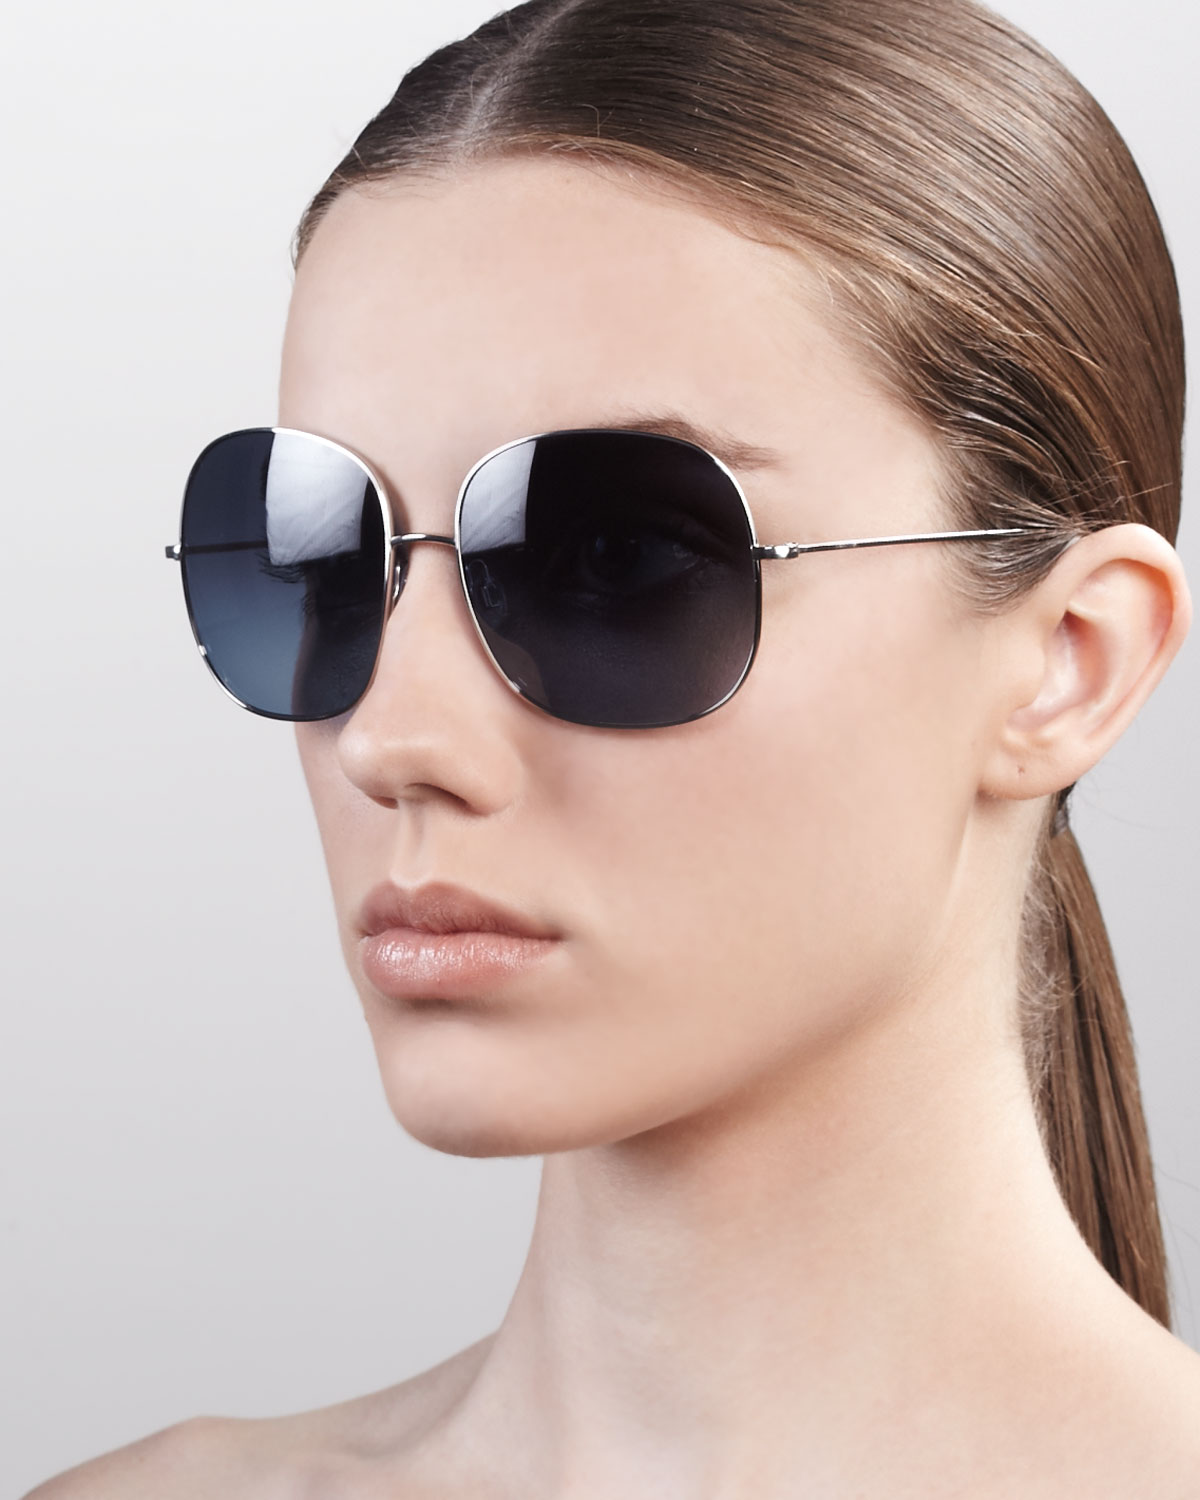 Lyst - Oliver Peoples Daisy Oversize Feminine Sunglasses Silver in Metallic